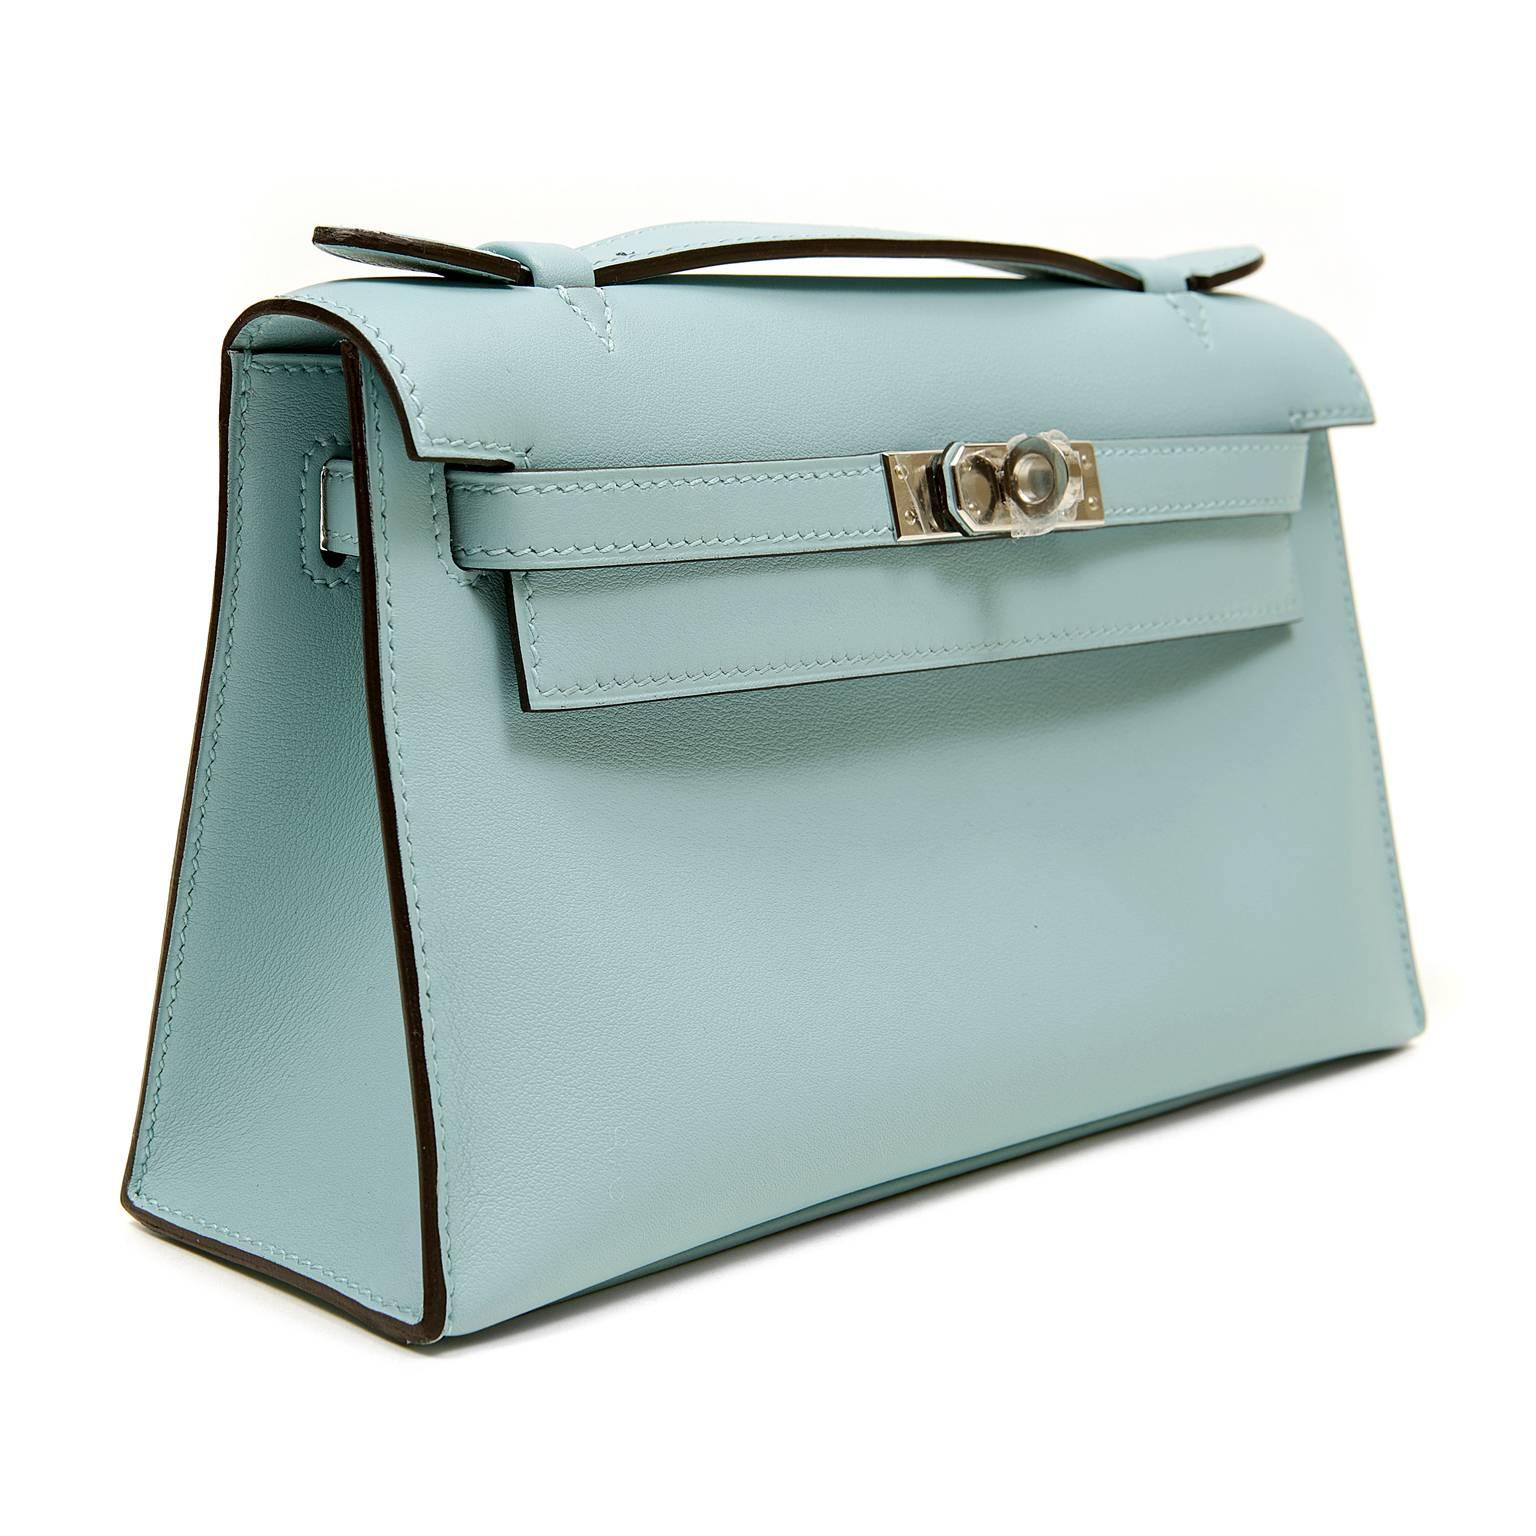 Hermès Blue Atoll Swift Kelly Pochette is in pristine condition; never before carried with the protective plastic intact on the hardware.   Hand crafted by skilled artisans, the Kelly Pochette is highly coveted and favored by celebrities like